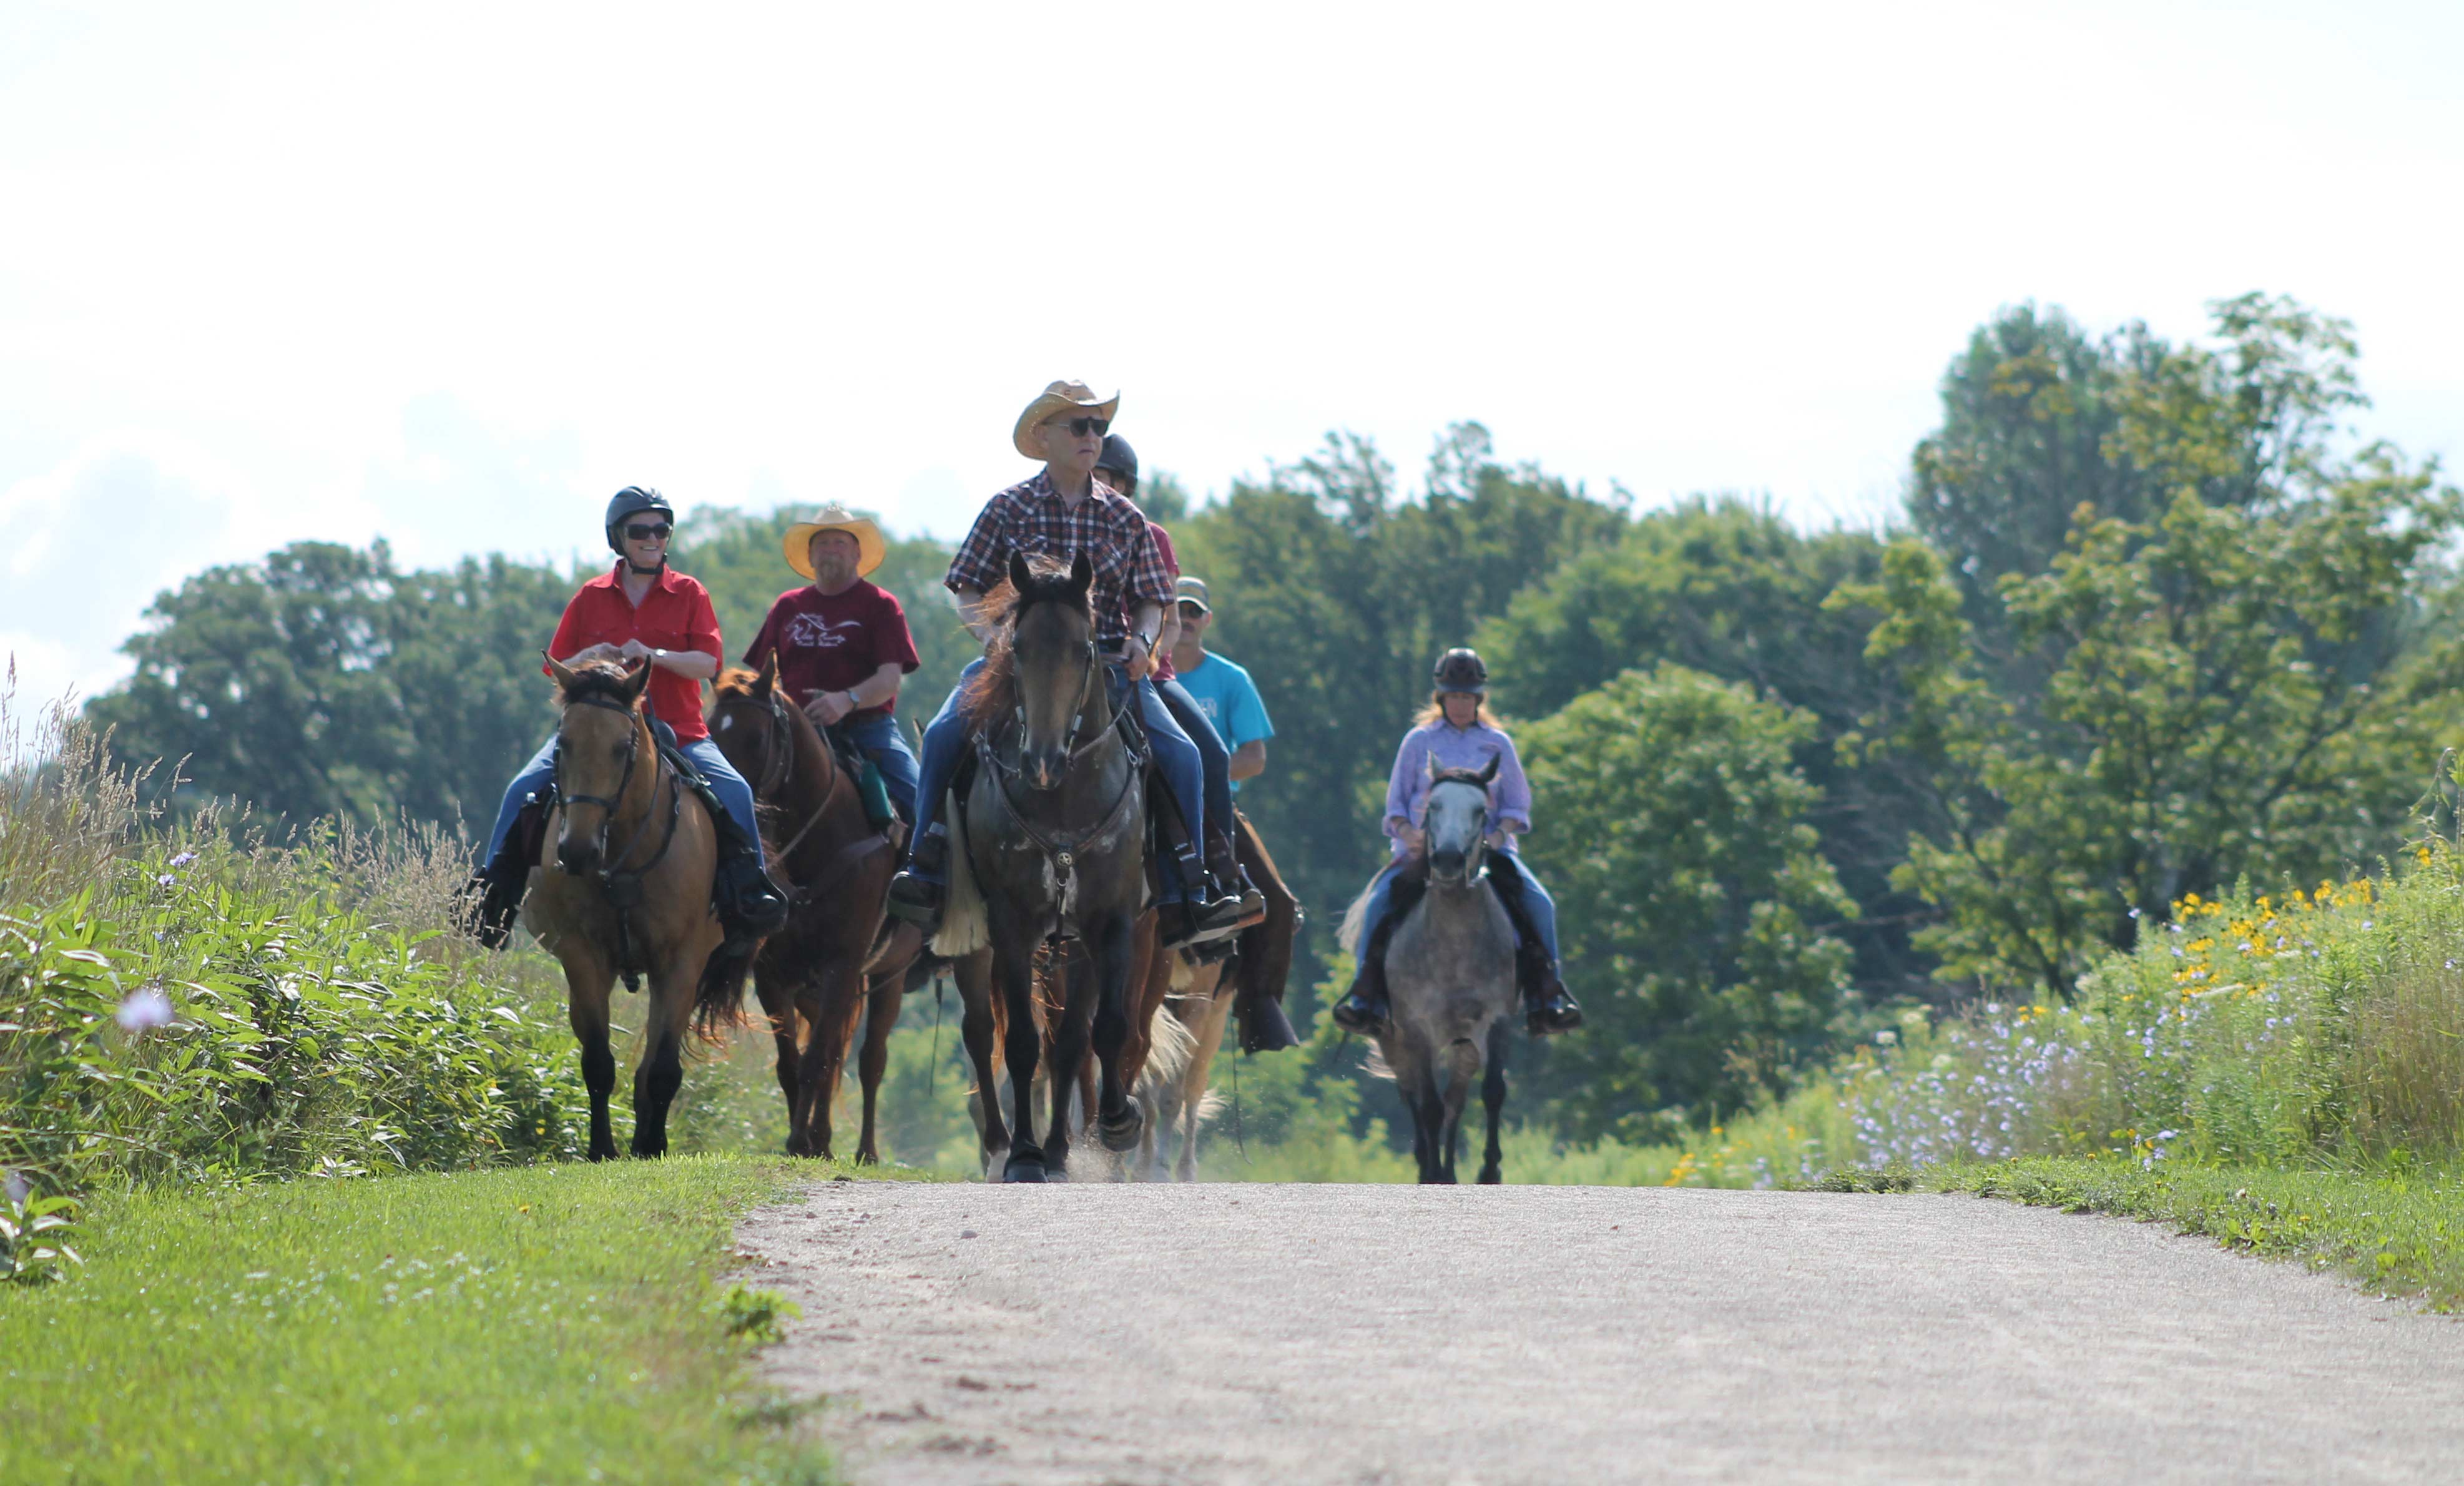 A group of horseback riders along the trail.